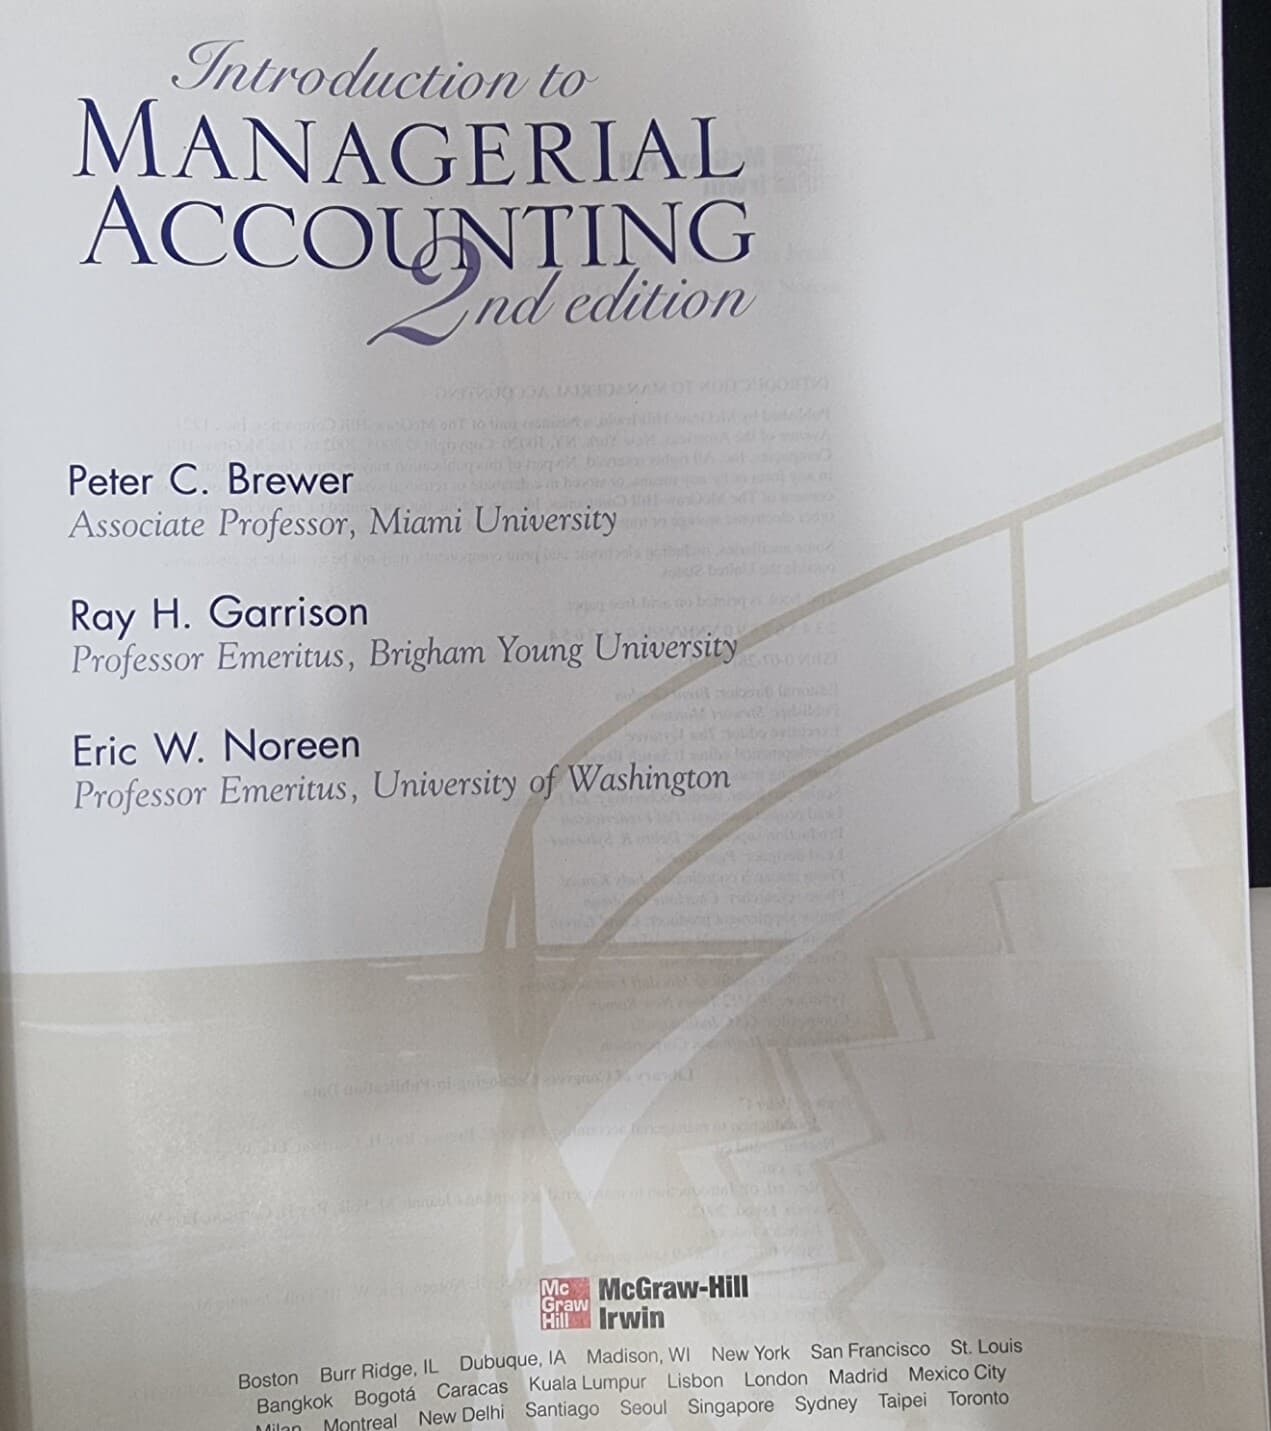 INTRODUCTION TO MANAGERIAL ACCOUNTING 2nd Edition